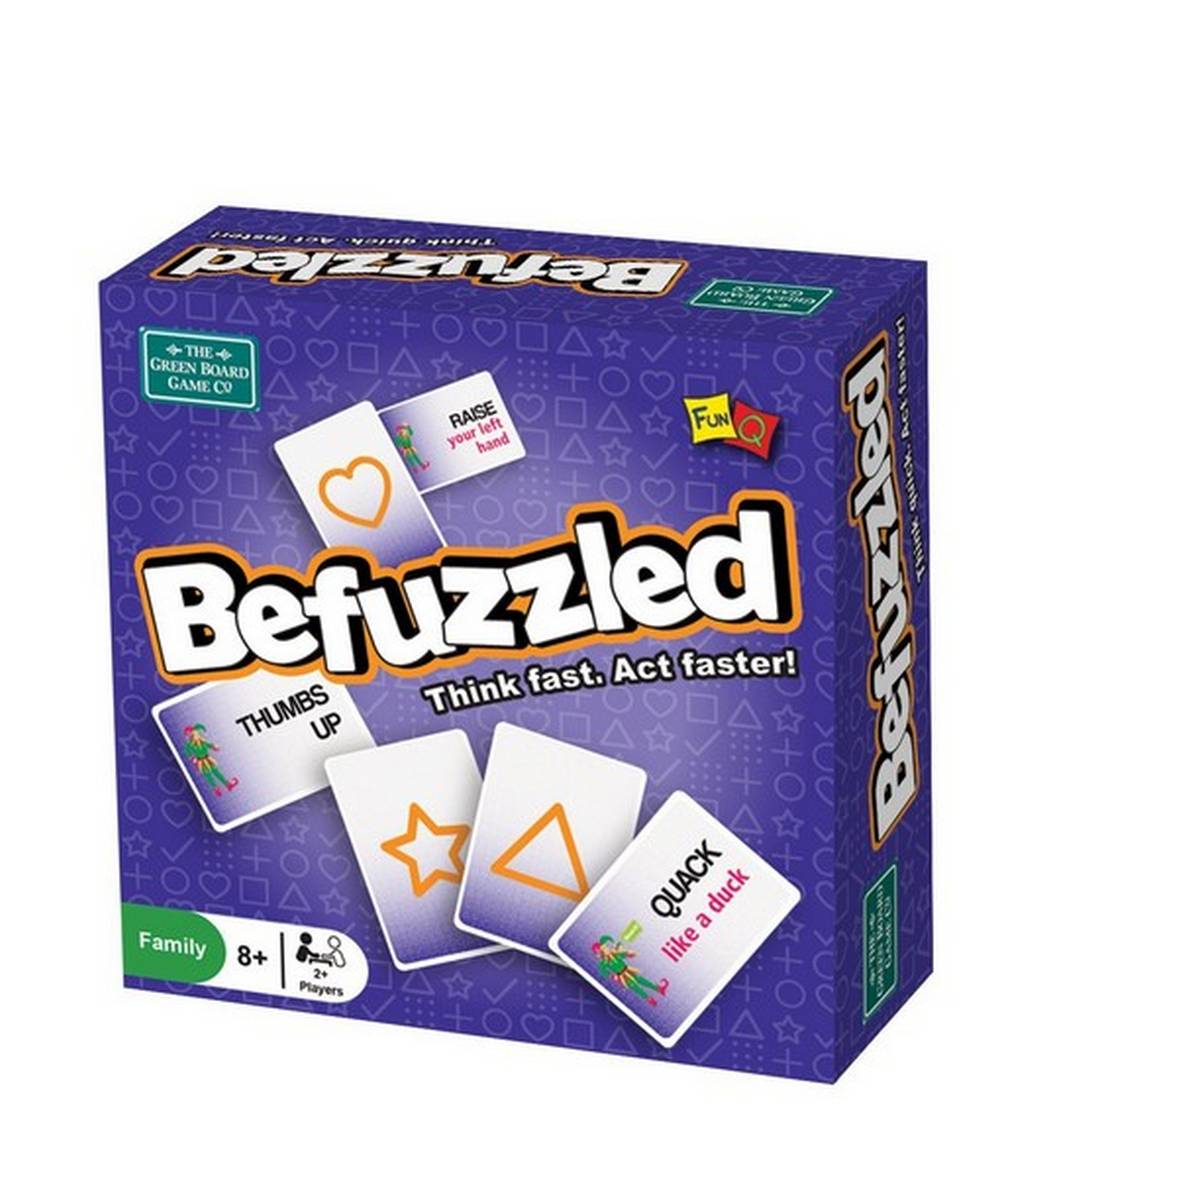 Befuzzled Game